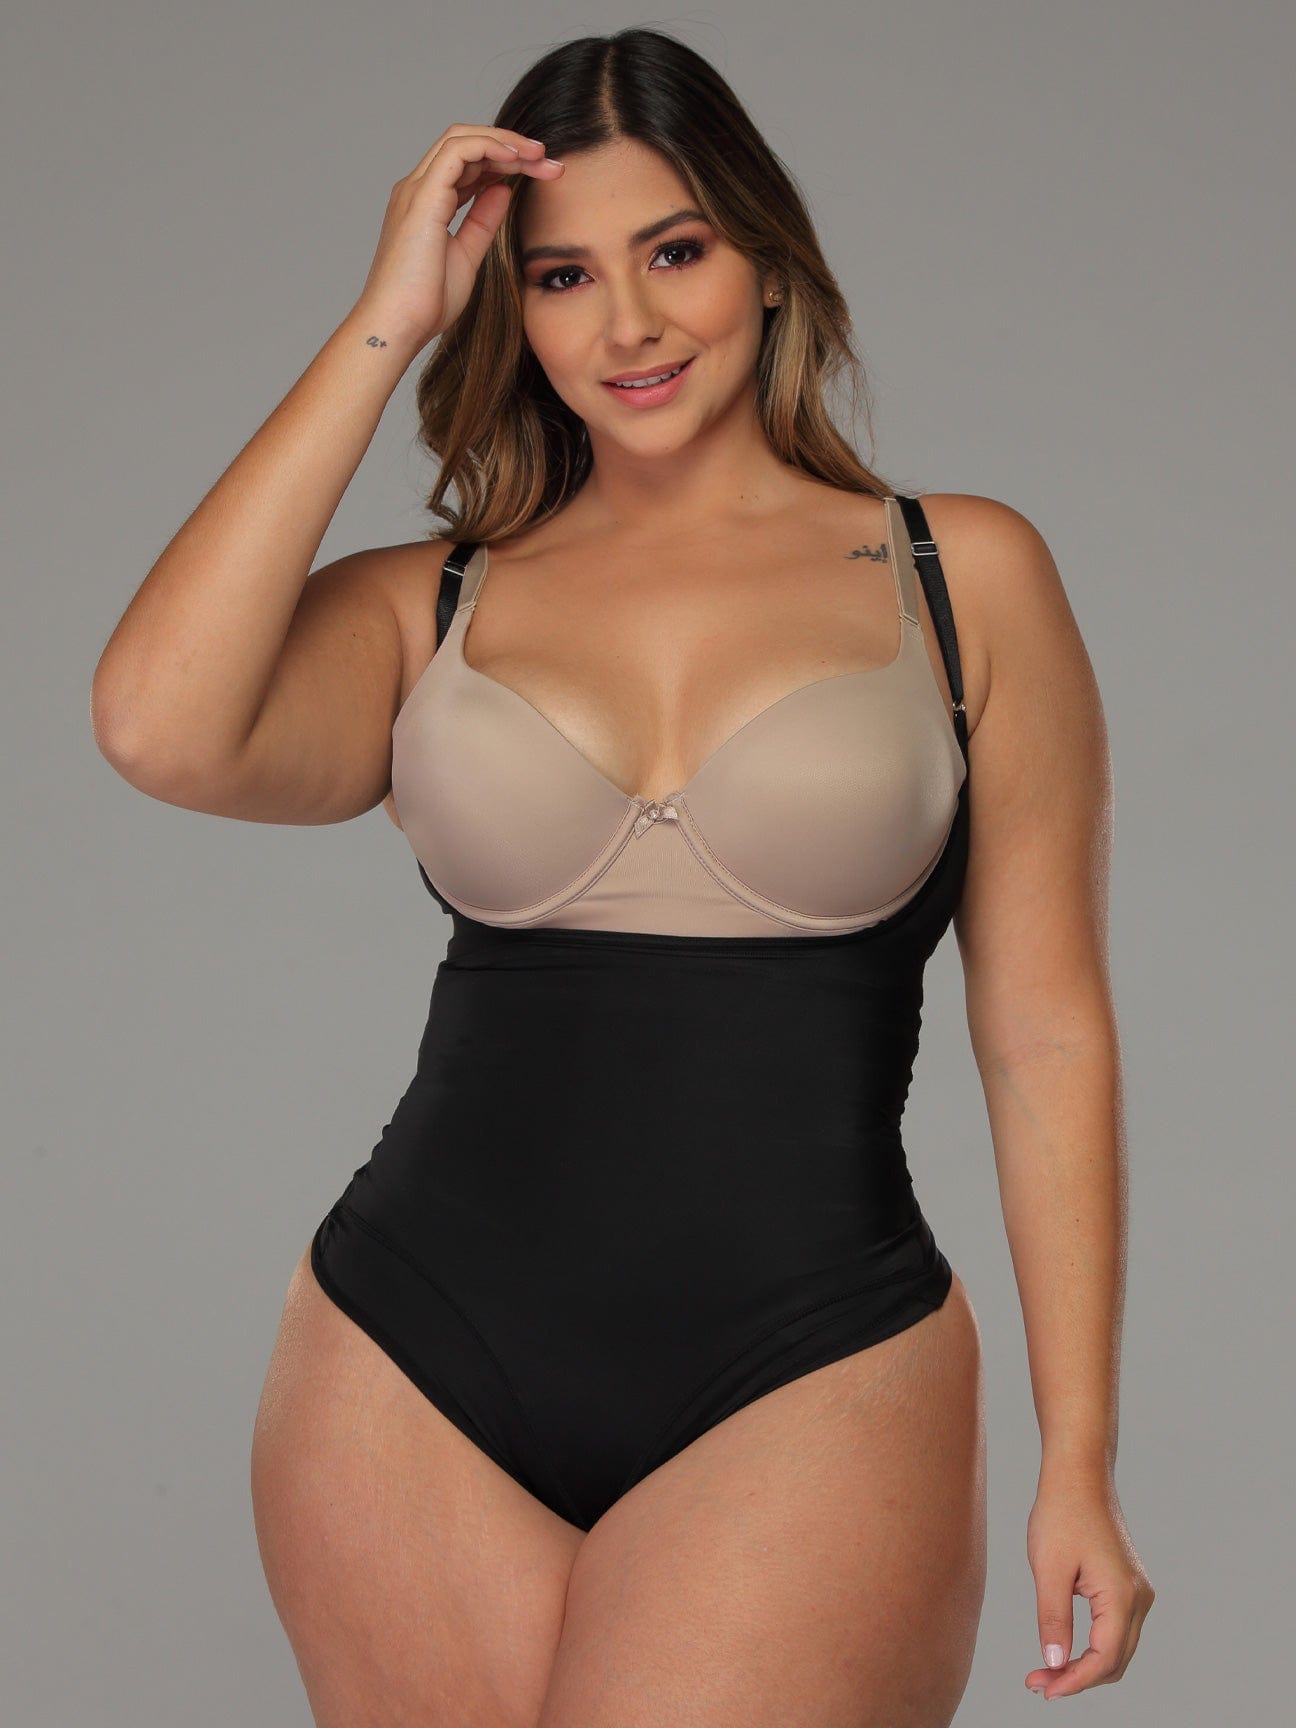 High Compression Womens Black Shapewear Bodysuit With Post Liposuction,  Tummy Control, Butt Lifter, And Fajas Perfect For Shaping And Body Shaper  Dropshipping Available From Daylight, $25.74